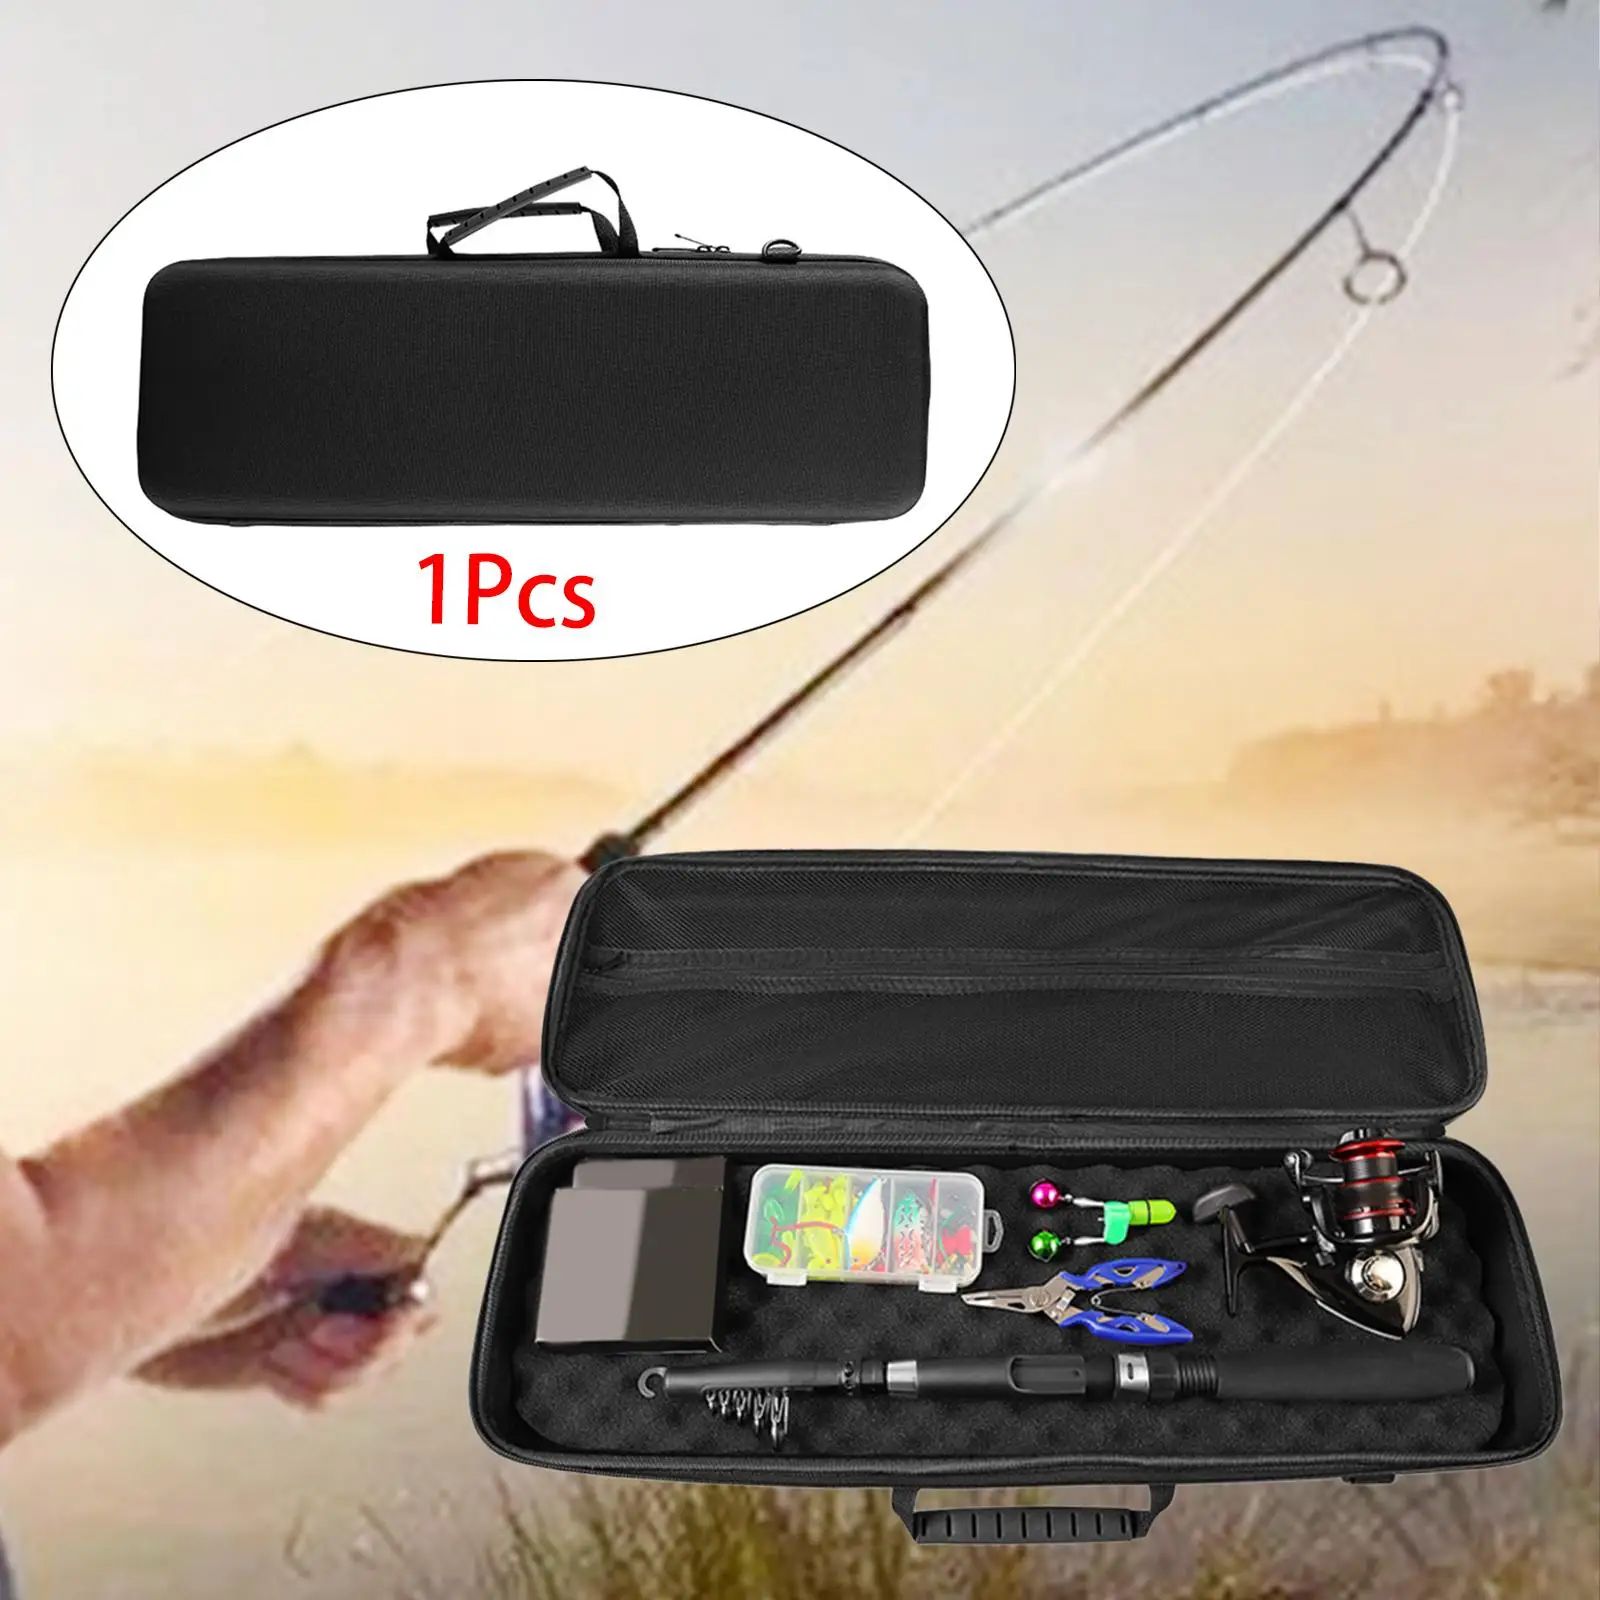 Fishing Rod Reel Bag Gear Fittings Equipment Sturdy Lightweight Practical with Strap Wear Resistance Organizer Travel Carry Case